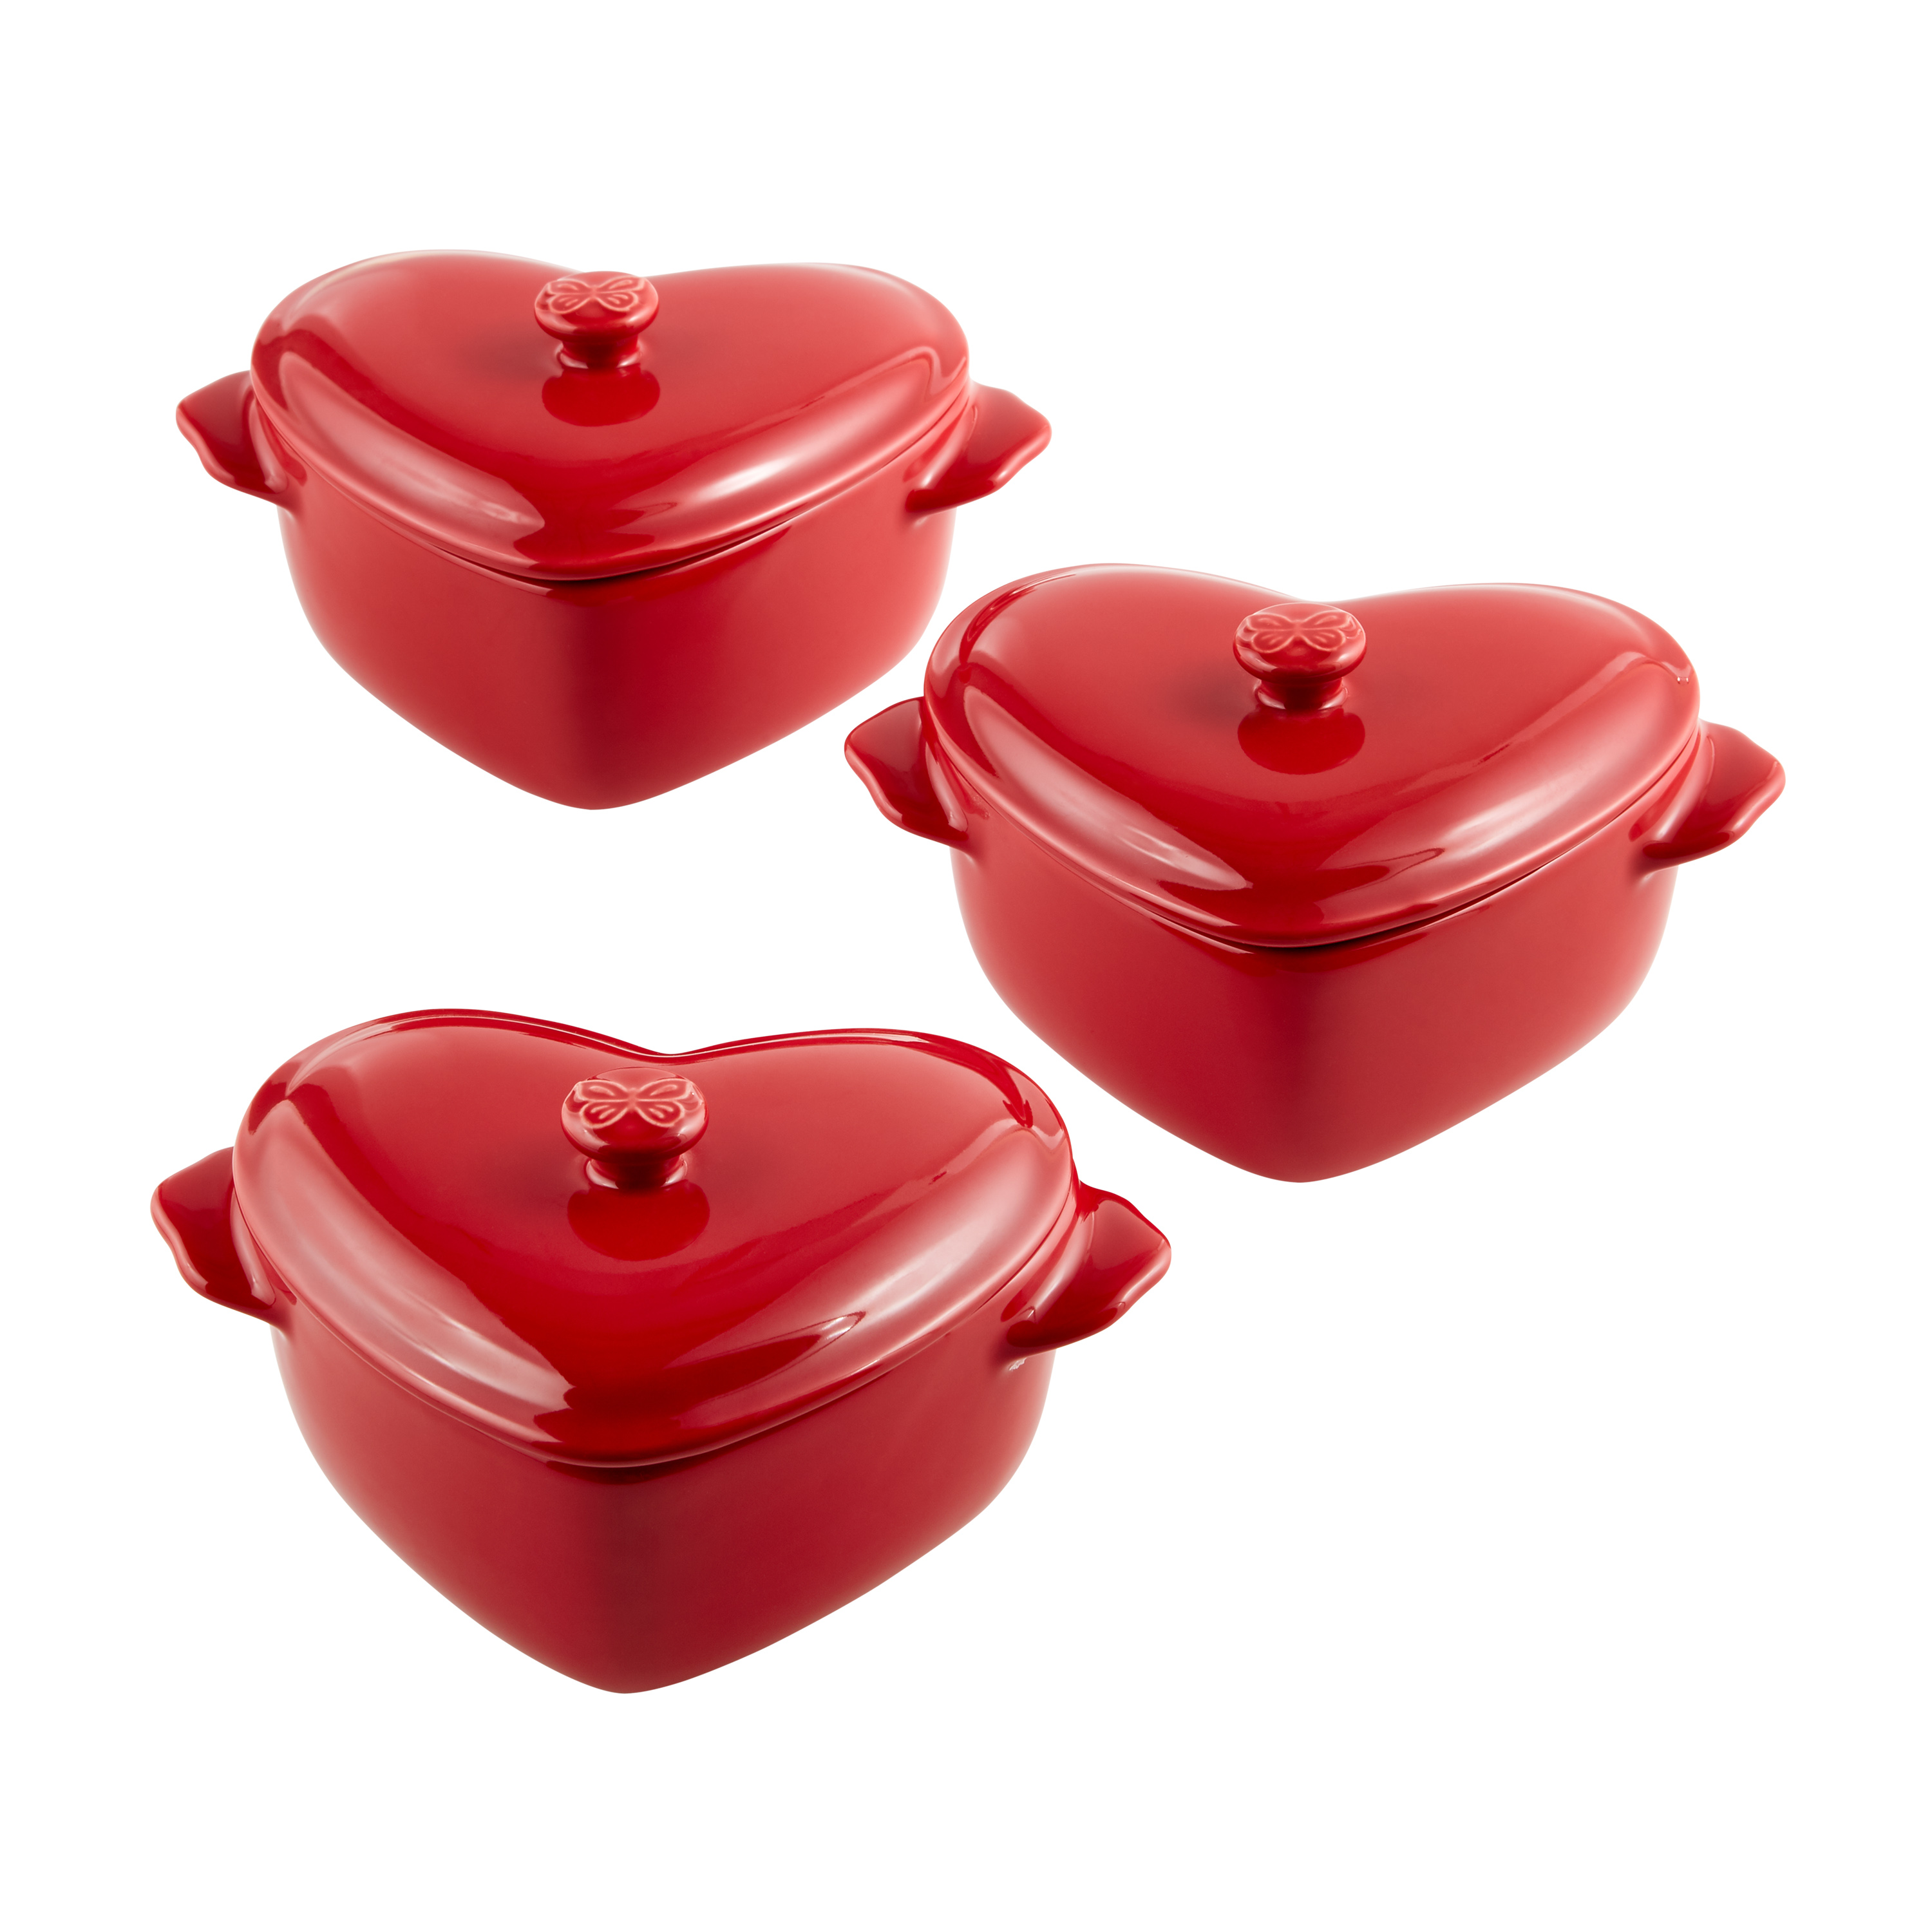 3 Red Mini Heart, Ceramic Baking Dish with Lid, The Pioneer Woman 6.45" - image 1 of 7